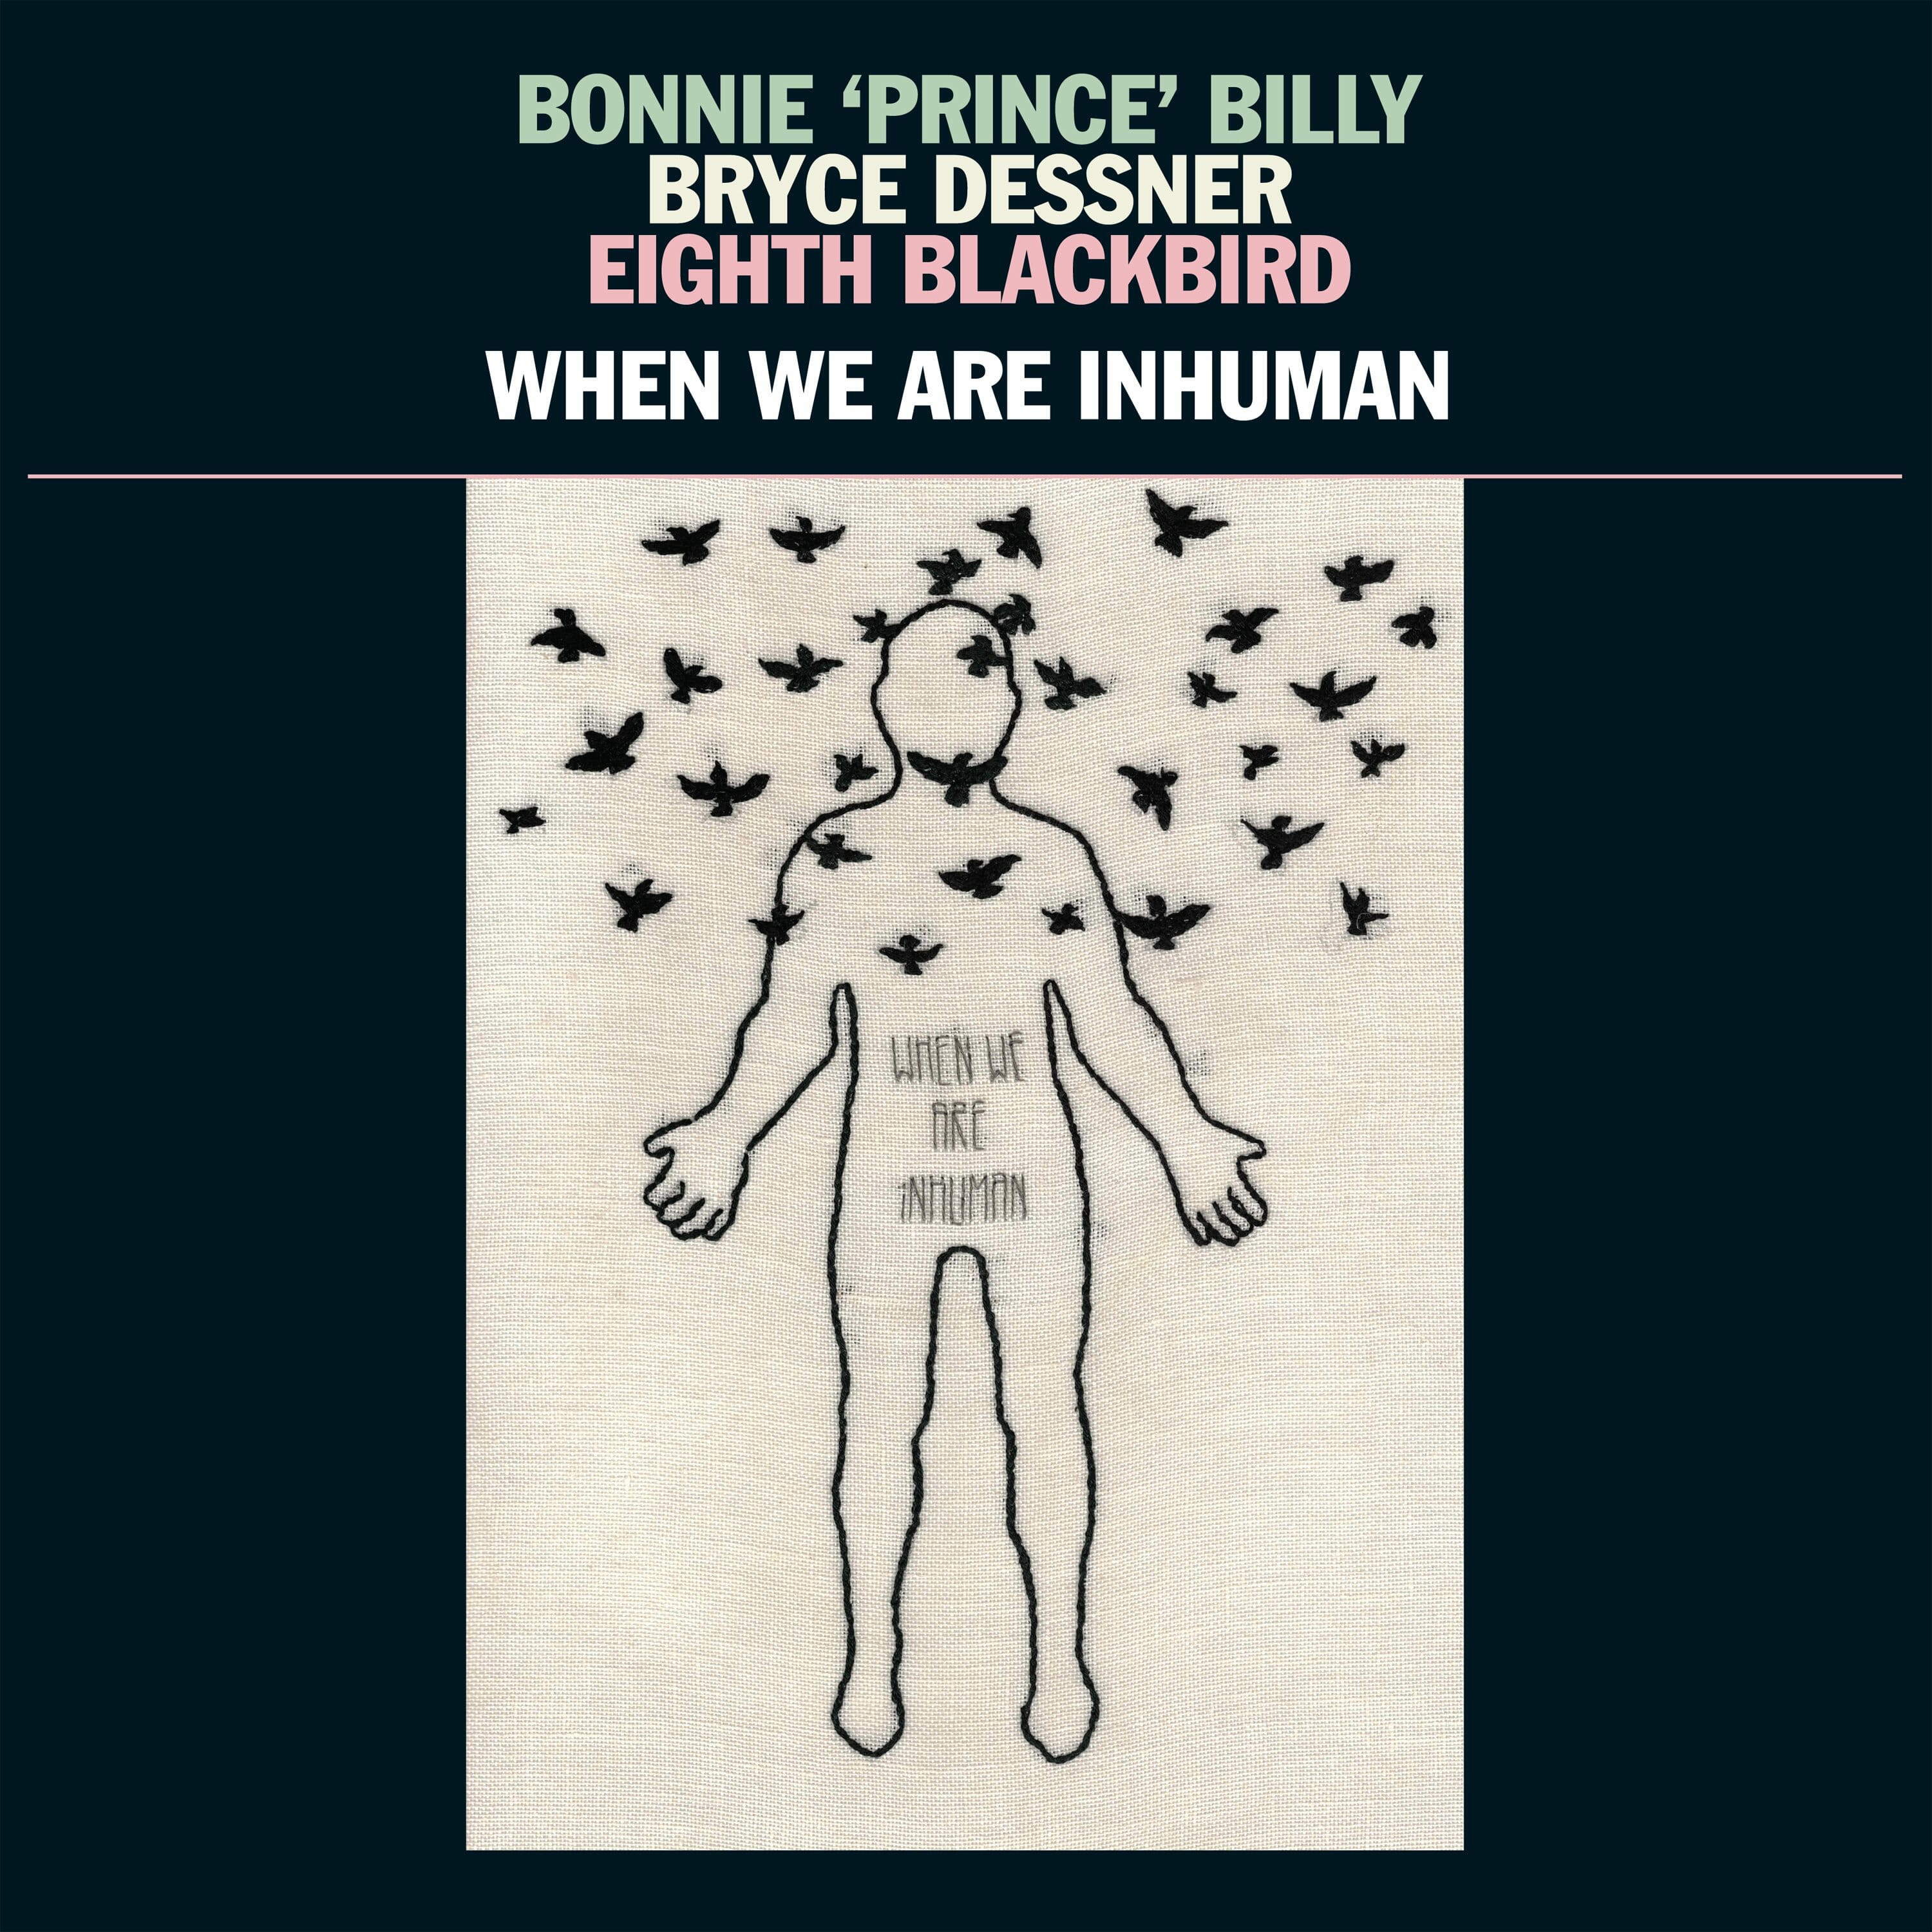 Bonnie 'Prince' Billy, The National's Bryce Dessner & Eighth Blackbird Are Collaborating on New Album